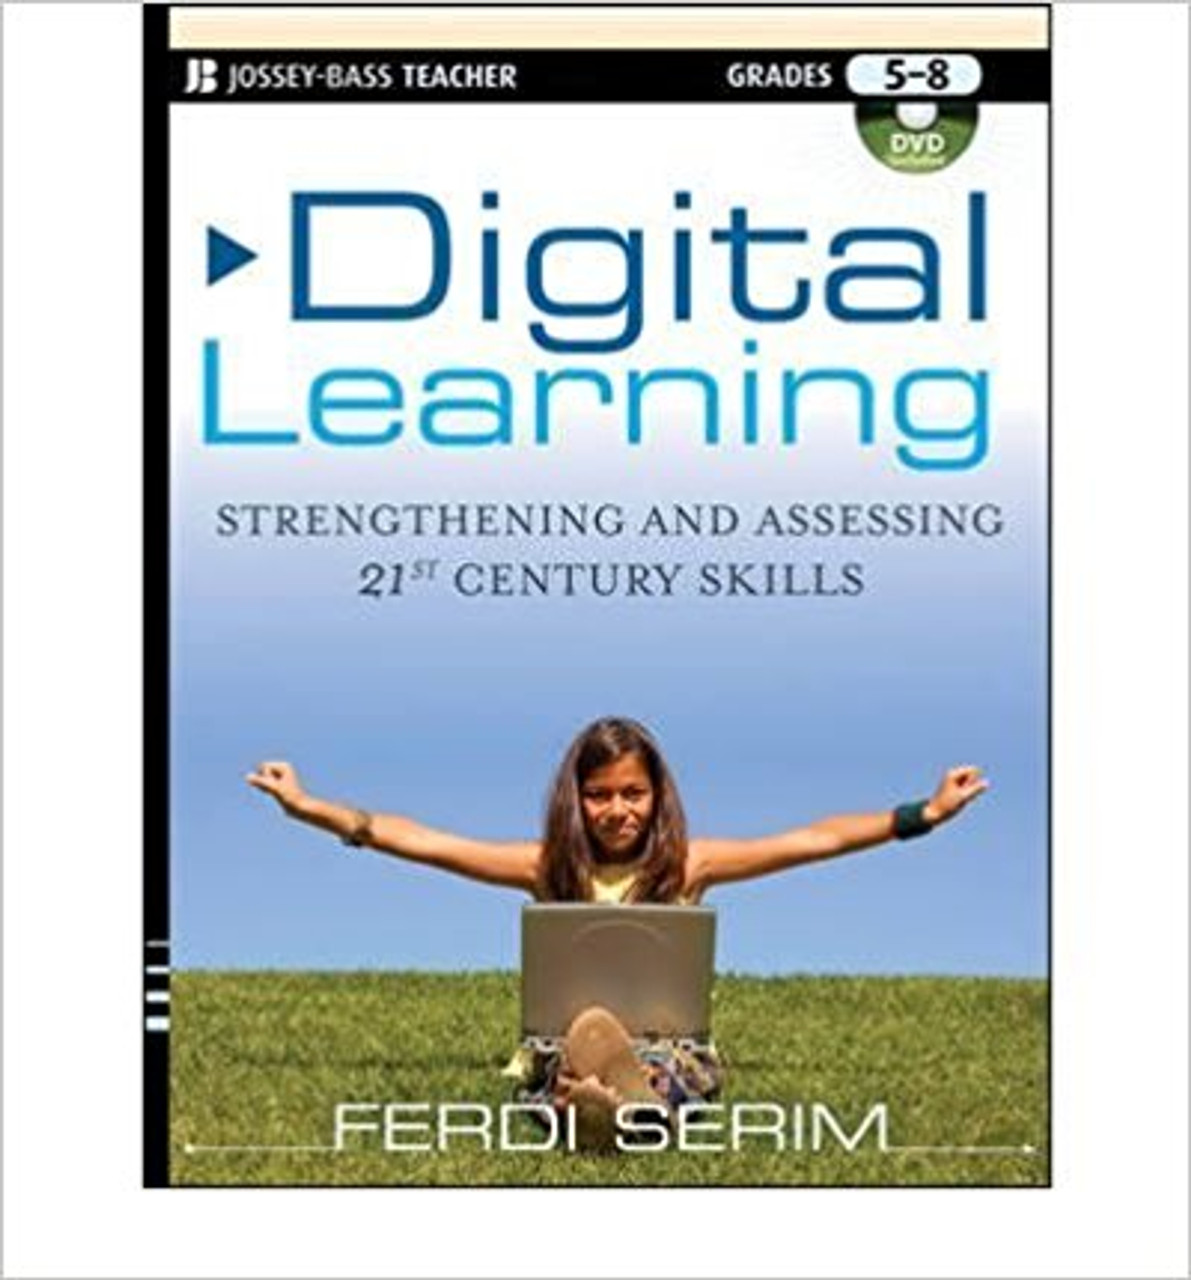 This essential new resource offers a practicalpathway for developing 21st century skills while simultaneously strengthening student core subject-area learning. Digital Learning shows teachers how to use research-based practices to strengthen and assess the International Society for Technology in Education (ISTE) National Education Technology Standards (NETS) for students and teachers. By framing instruction within the language of the ISTE NETS, the common threads of lessons become clear, regardless of subject matter.